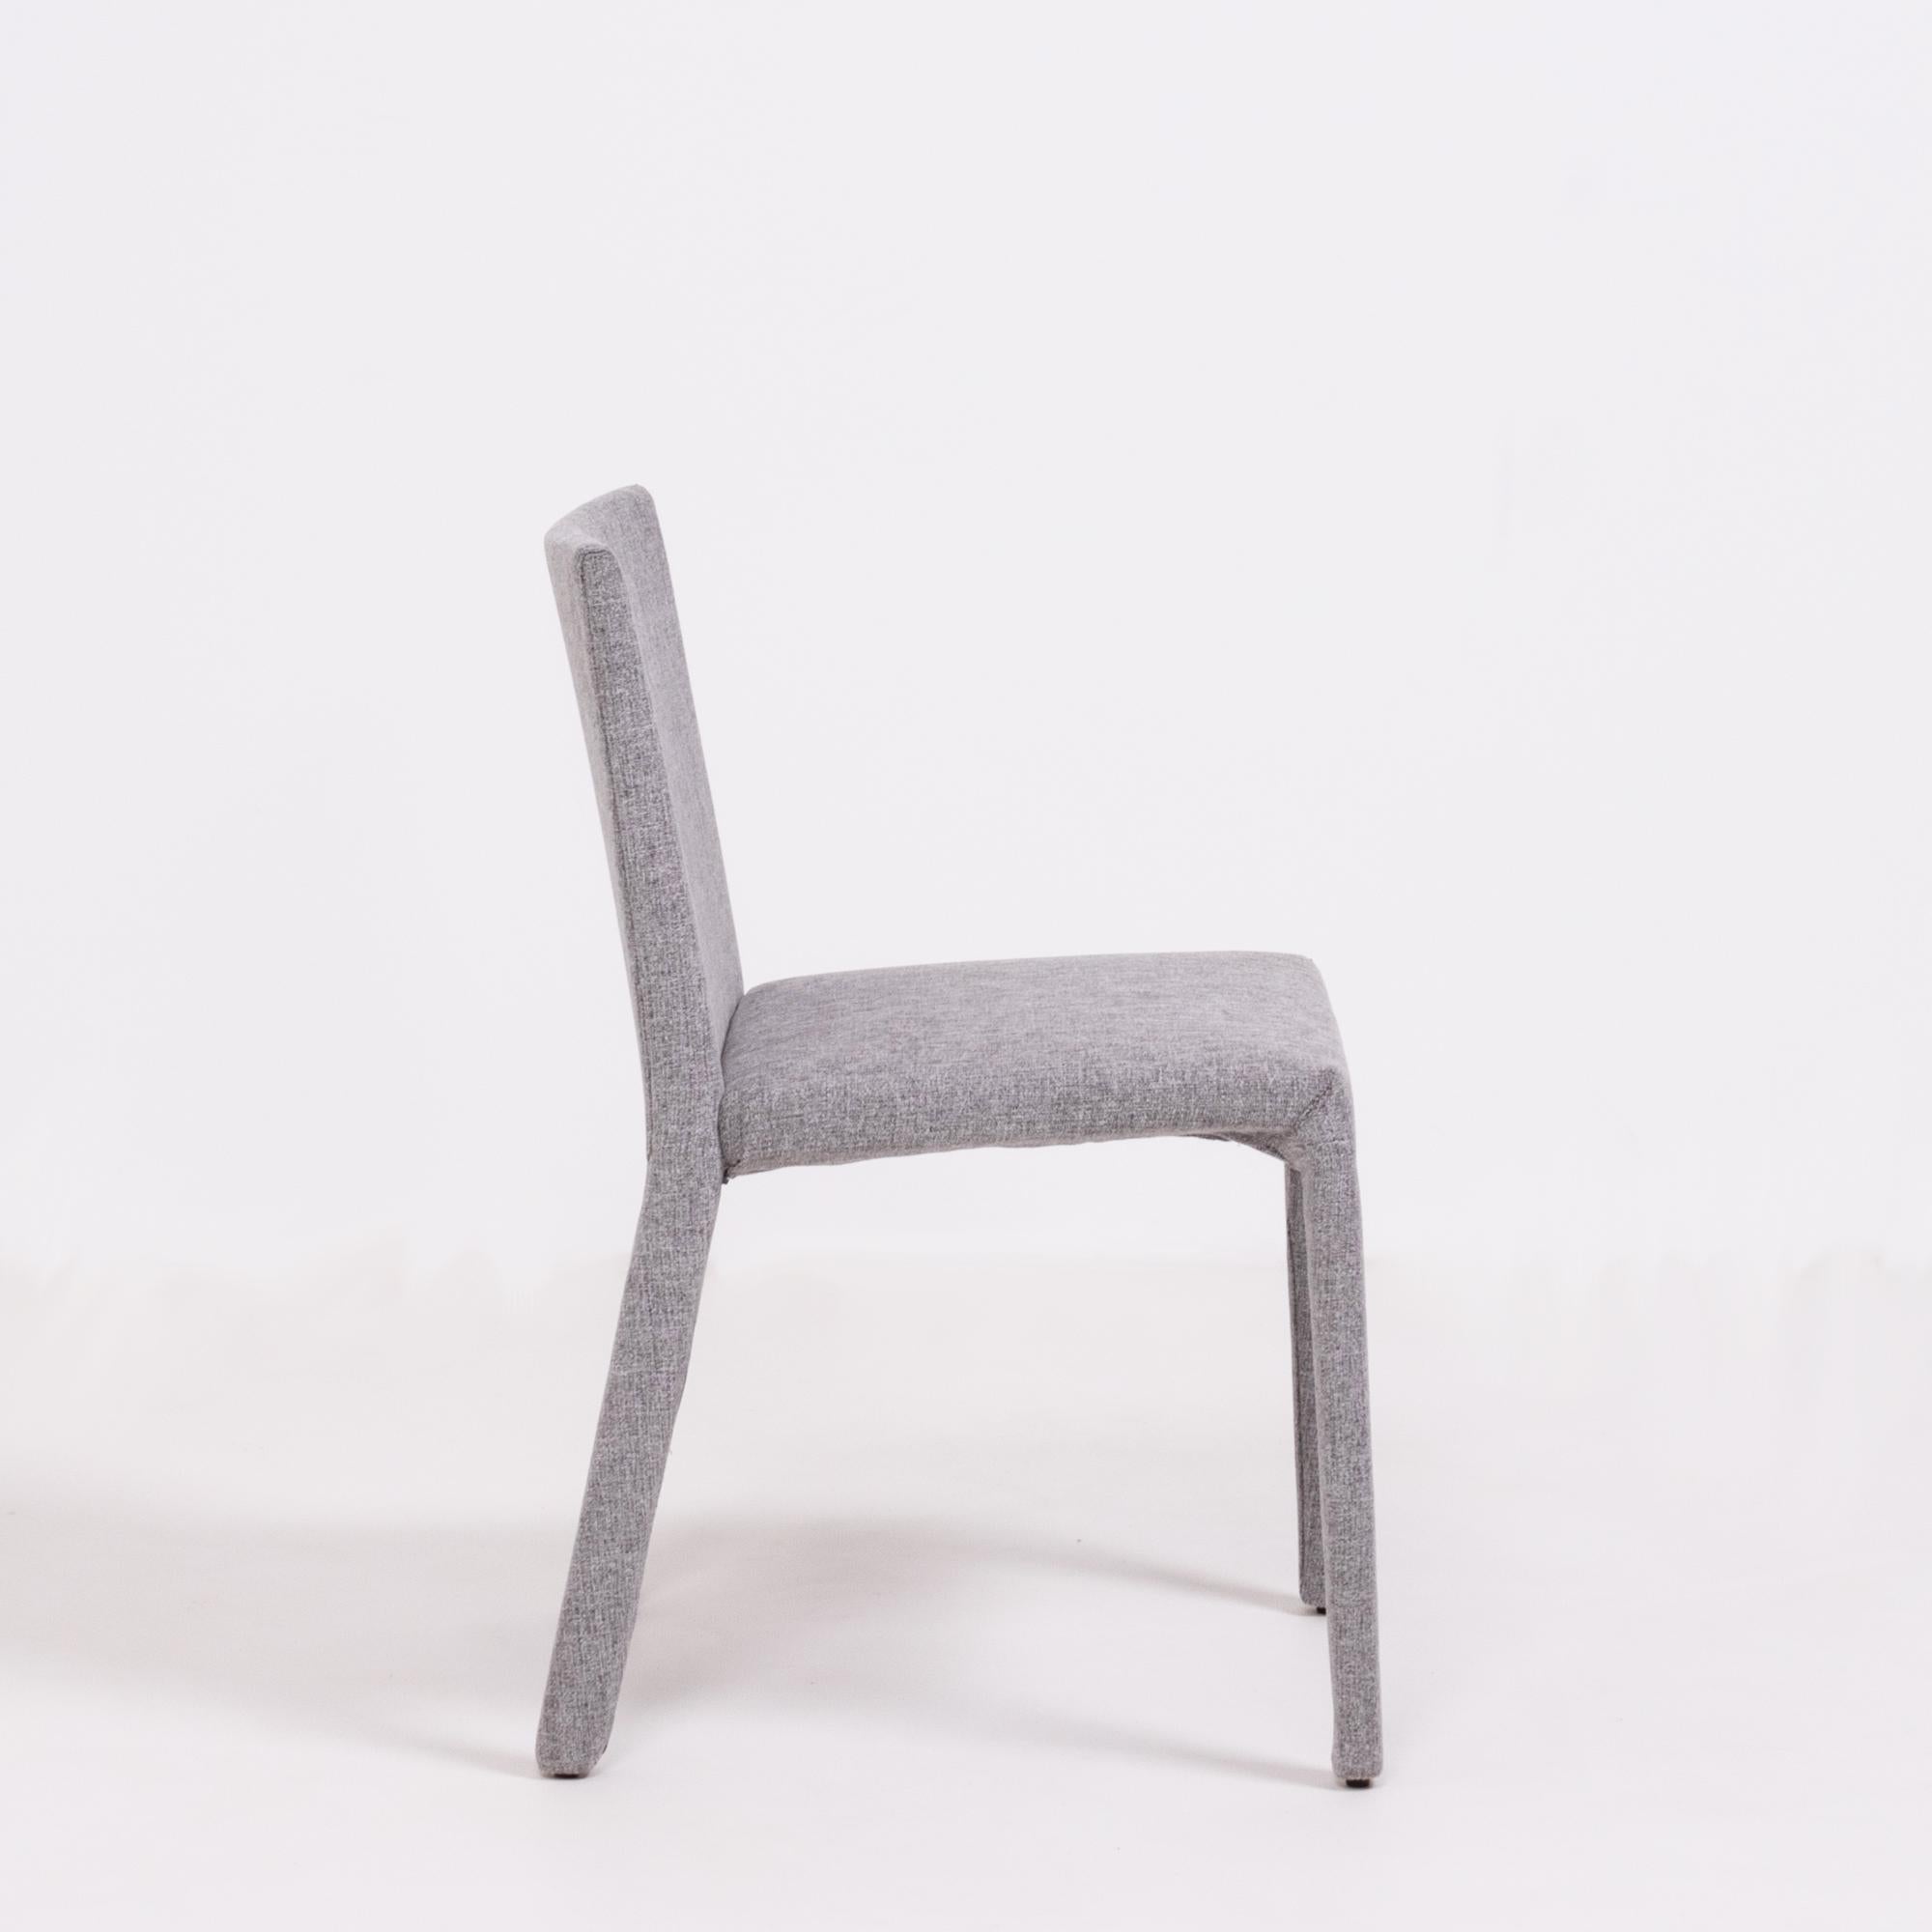 European Poliform 'Fly Tre' Grey Dining Chairs by Carlo Colombo, Set of 8